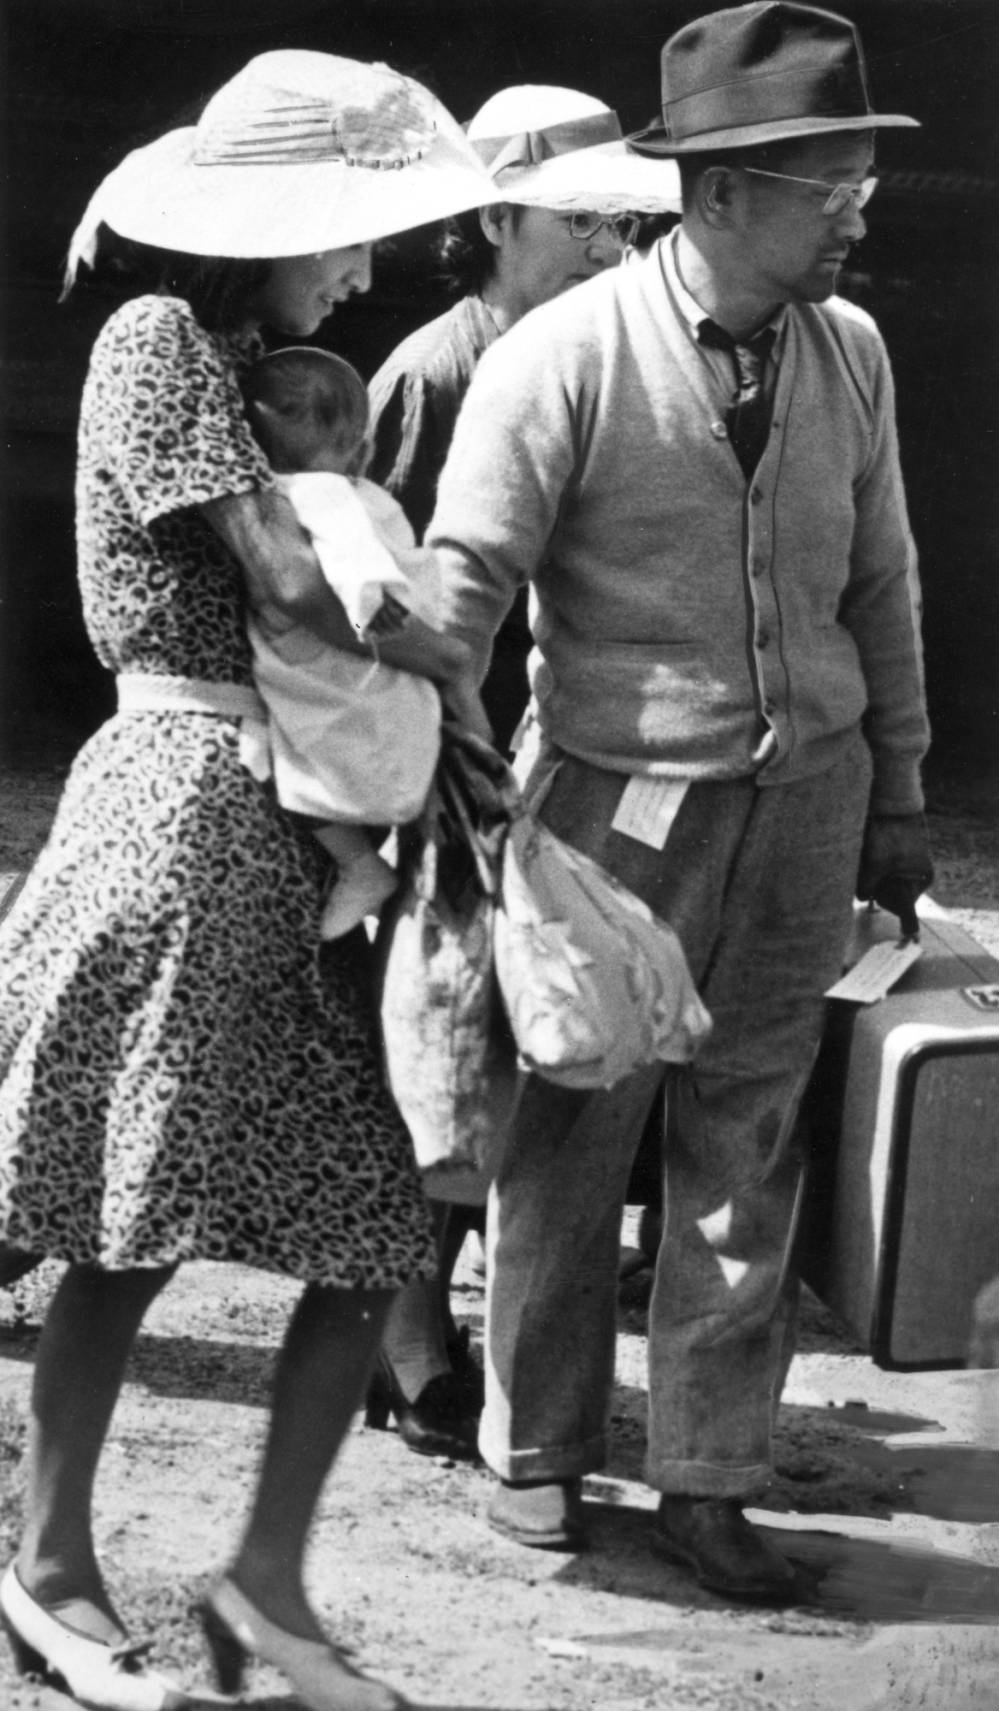  Japanese family on their way to the Granada Relocation Center, Camp Amache, Prowers County, southeastern Colorado, includes two women in dresses, heels and bonnets. One holds a baby, and a man in a sweater, tie, eye glasses and a hat, holds a suitcase. The man has a tag on his belt and another on the suitcase.